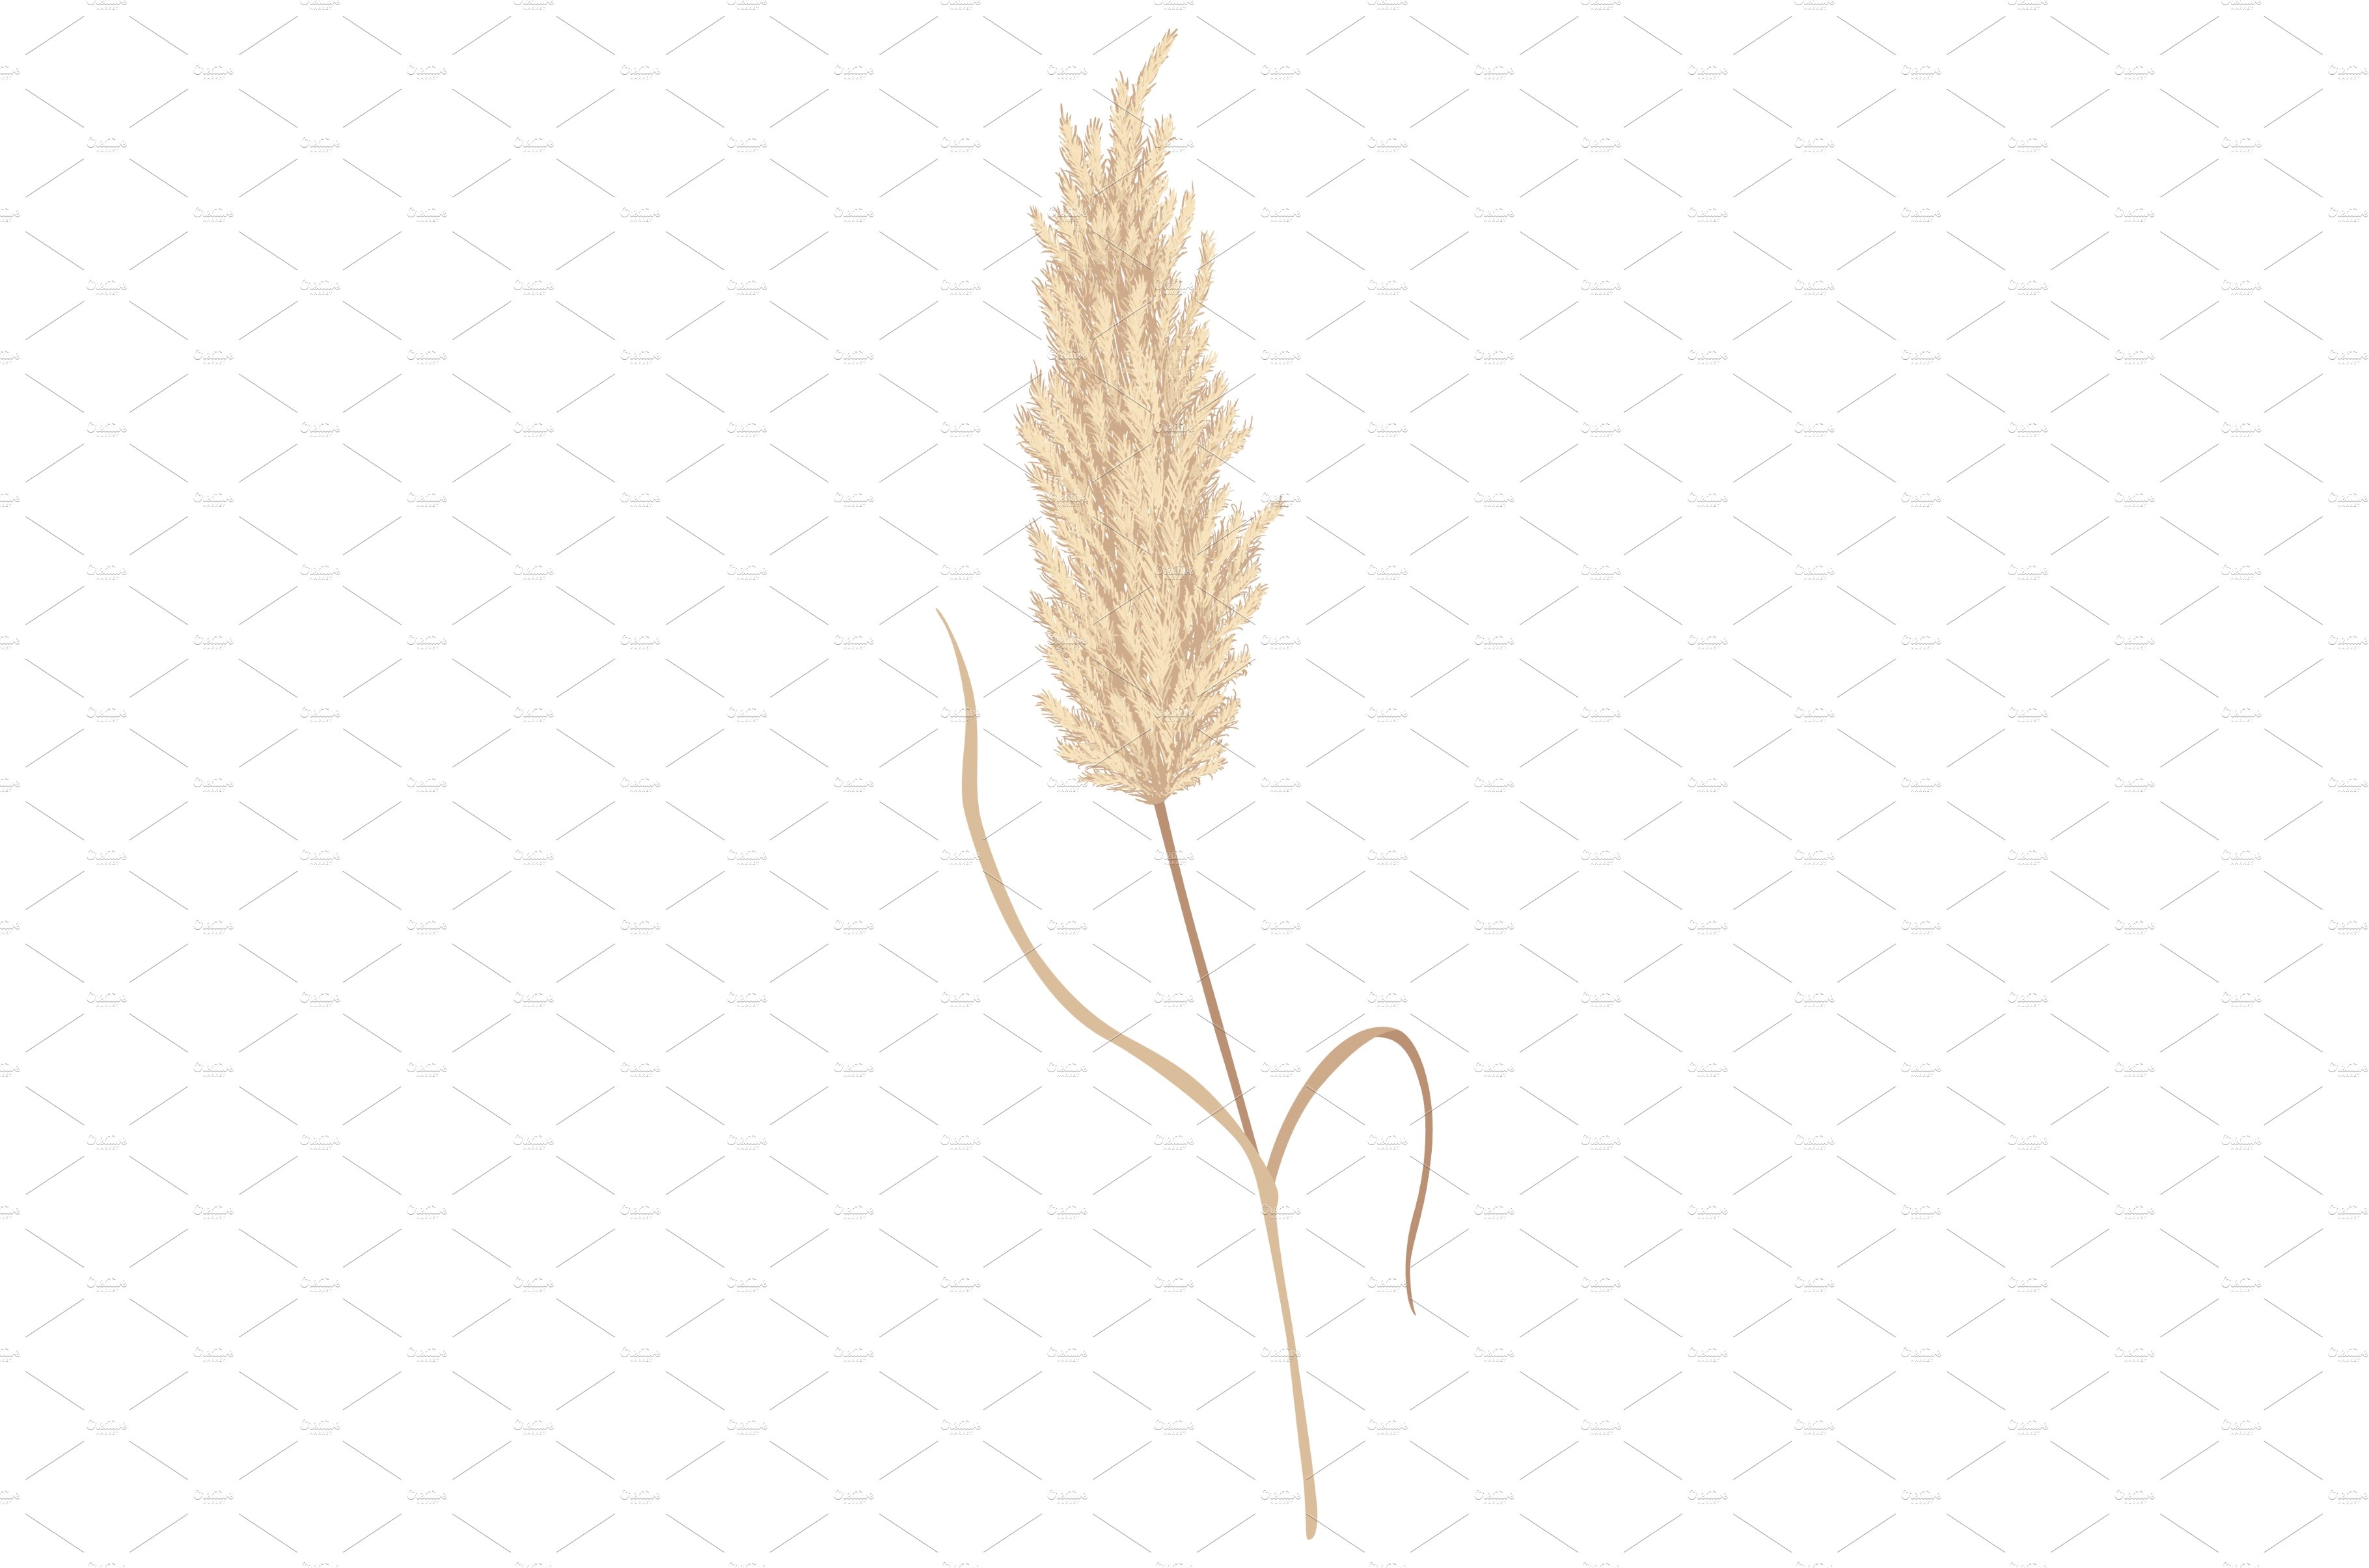 Plant that is standing up against a white background.